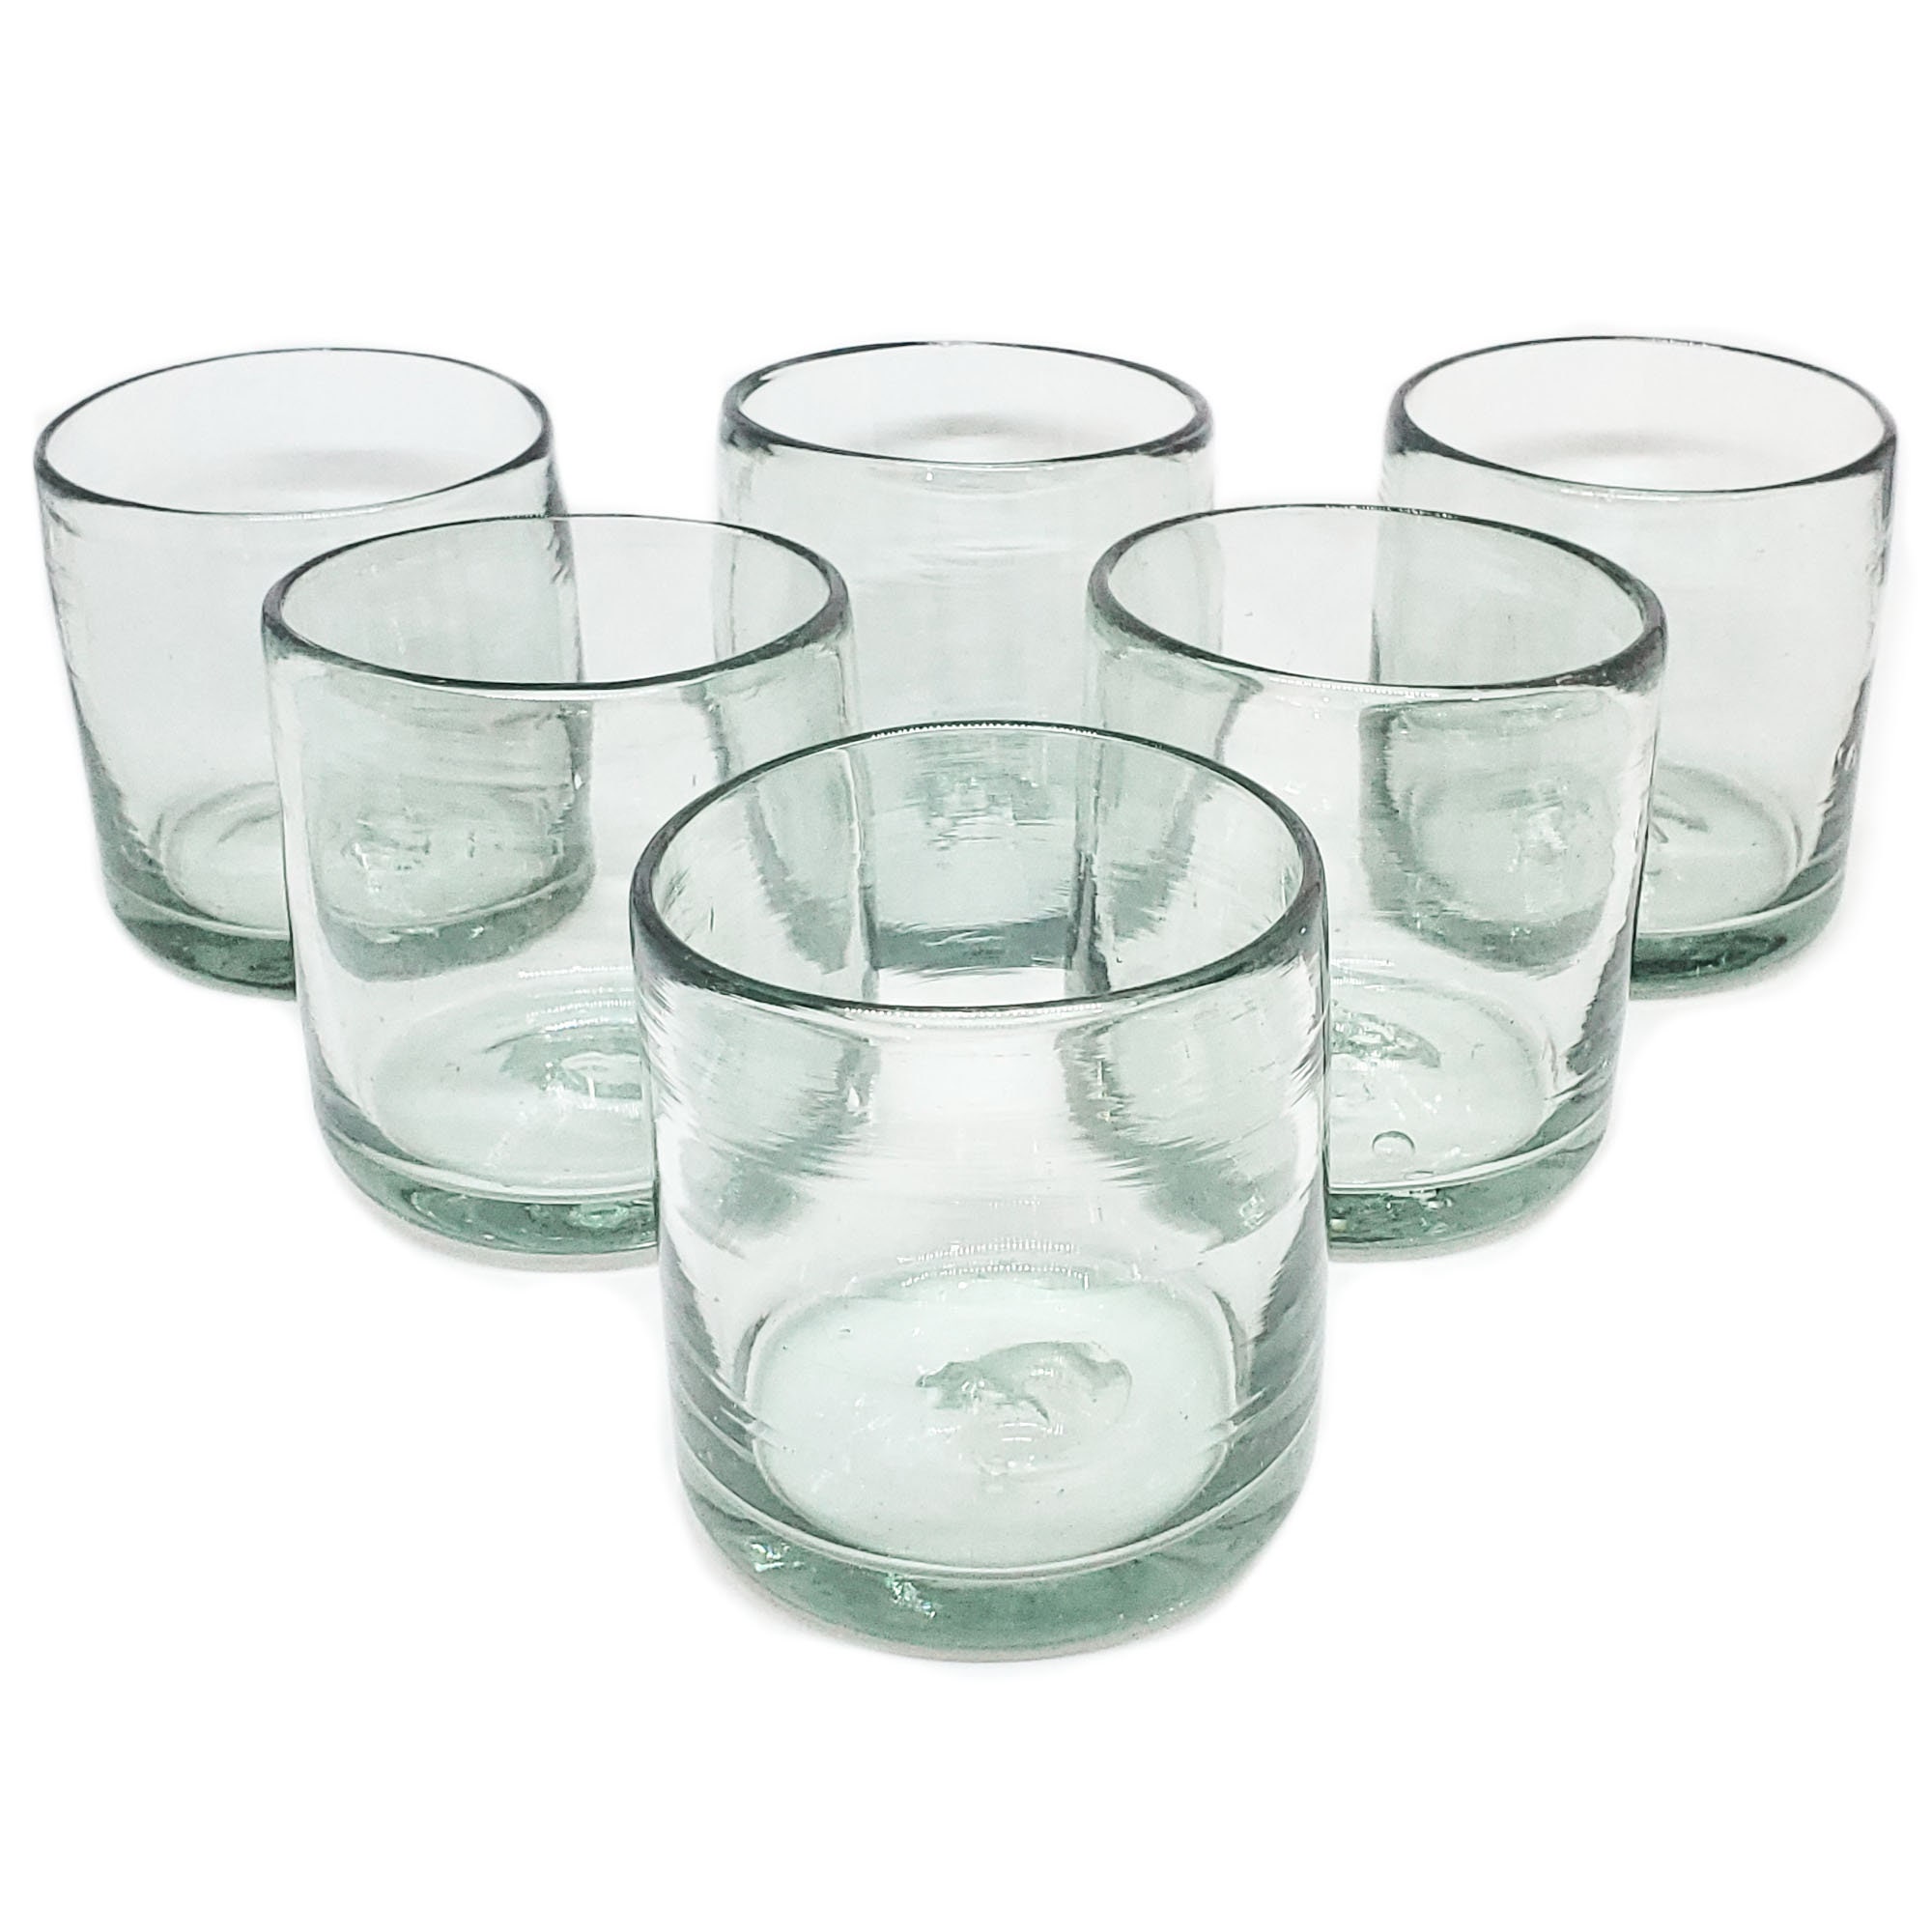 Search thick walled drinking glasses